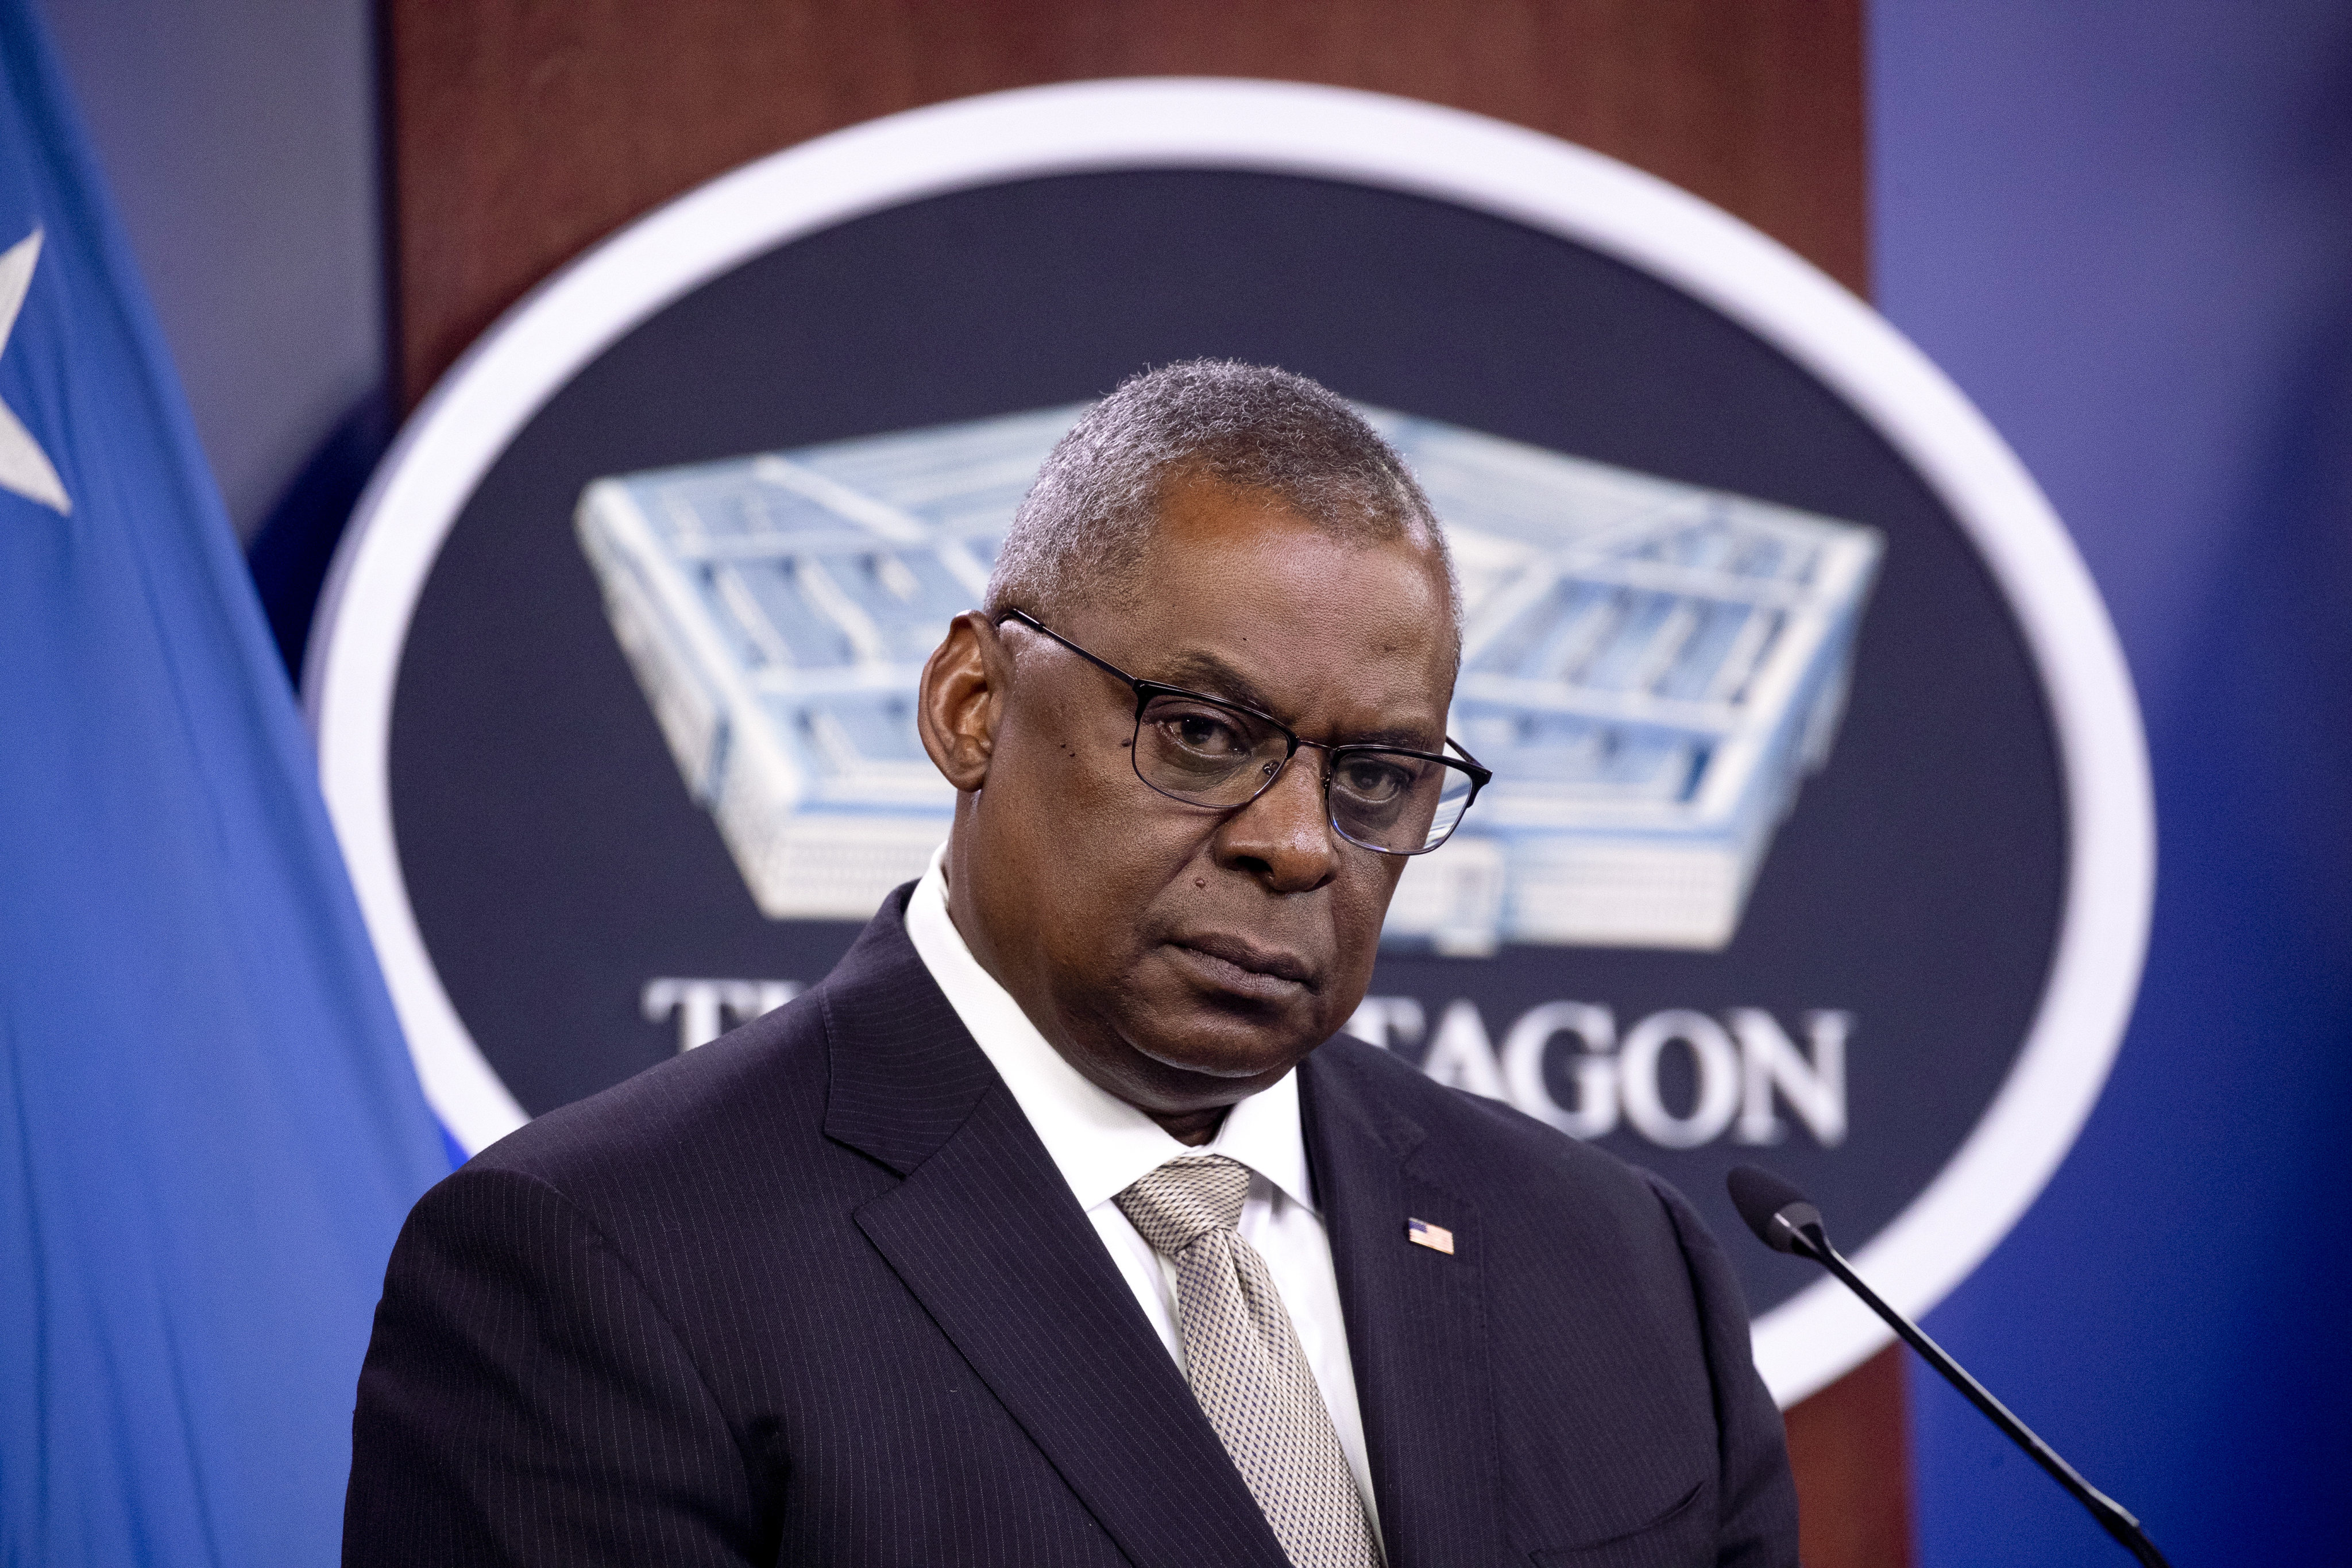 US Secretary of Defence Lloyd Austin called China’s security pact with Solomon Islands “a concerning precedent for the wider Pacific island region”. Photo: EPA-EFE